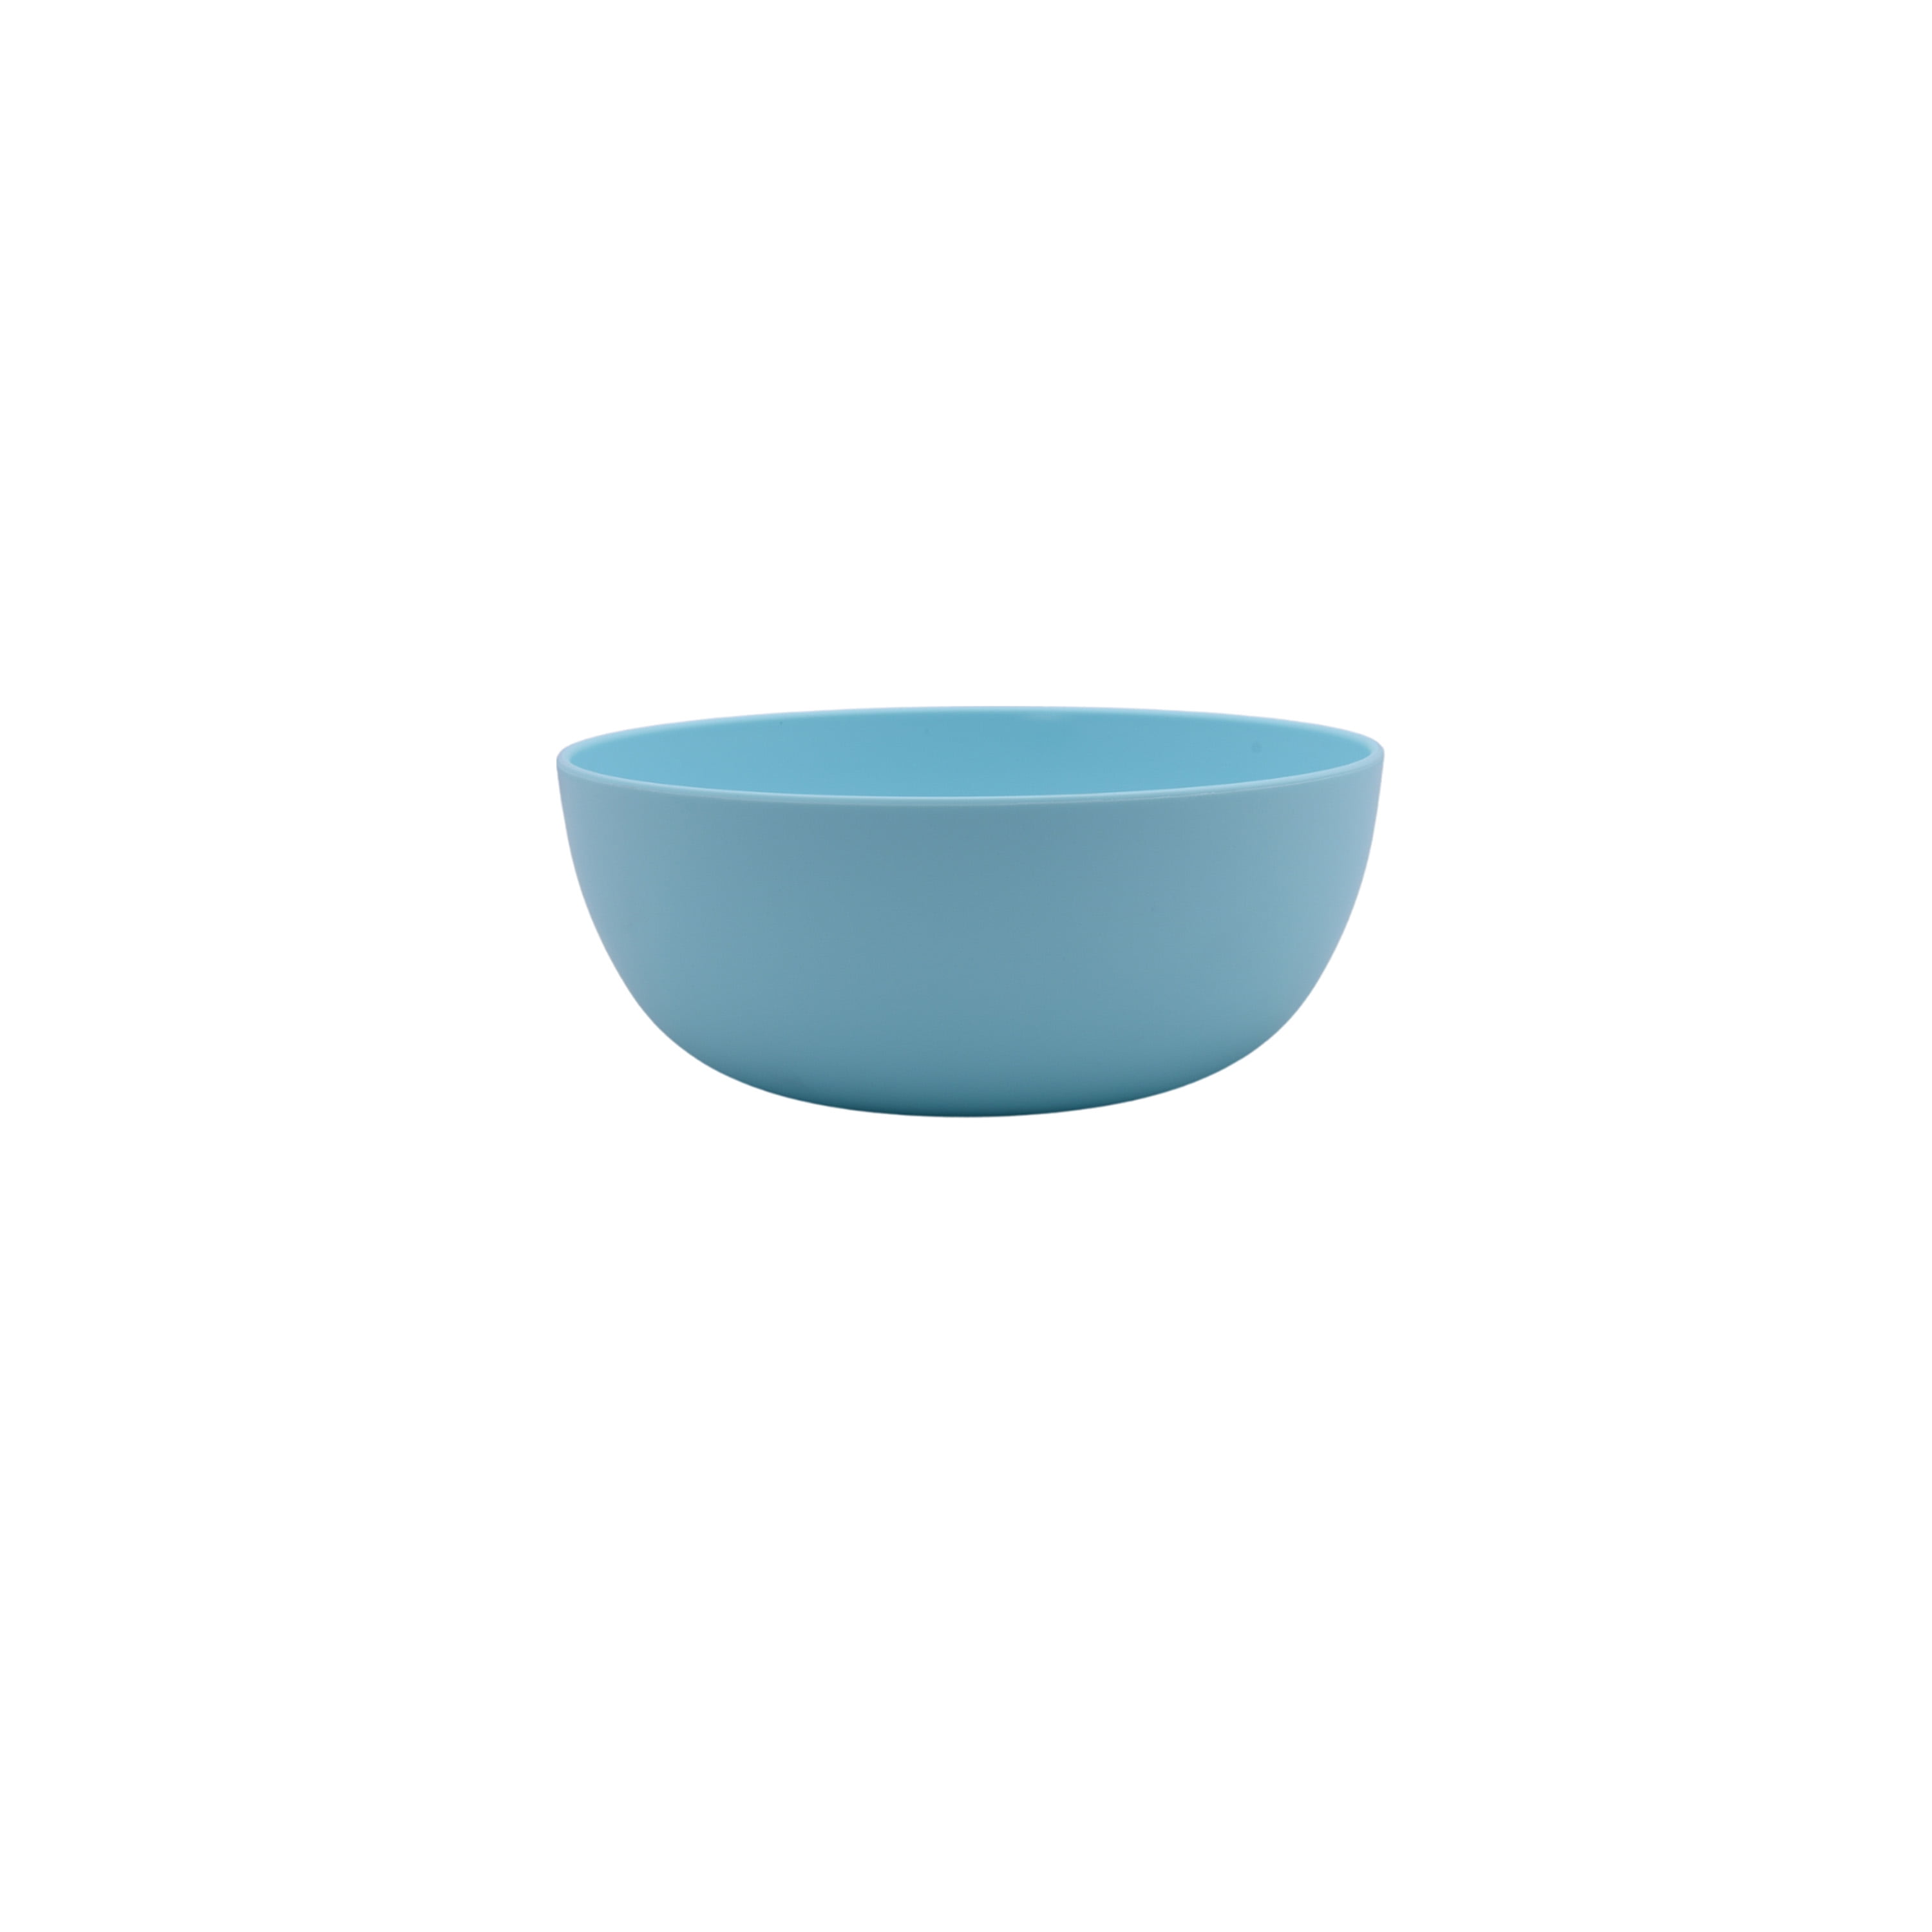 Mainstays 38-Ounce Plastic Round Bowl, Turquoise